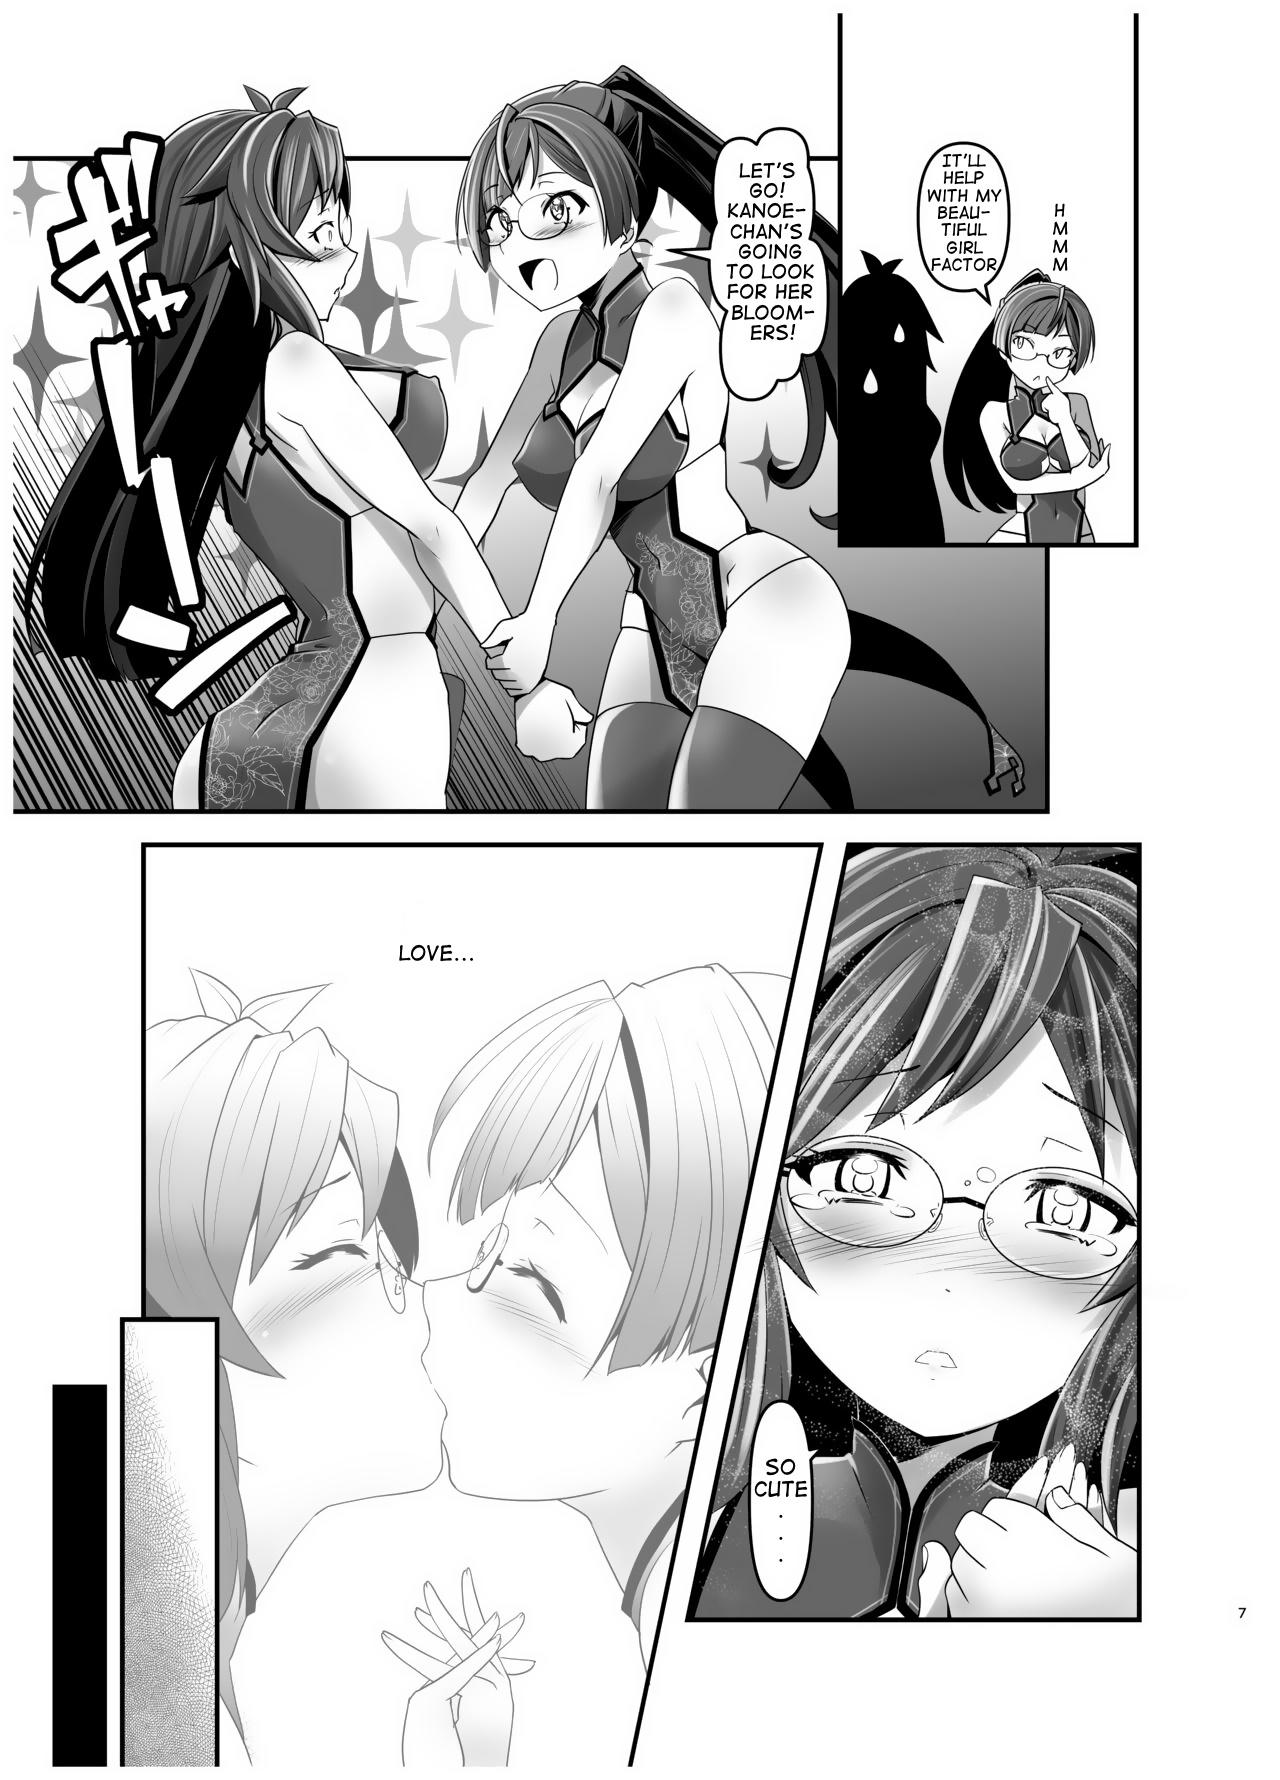 Groupsex Ore ga Bunretsu shite Isekai de TS suru Hanashi 4 | The Story of How I Split Up and TS In a Different World Ch 4 Tribute - Page 6